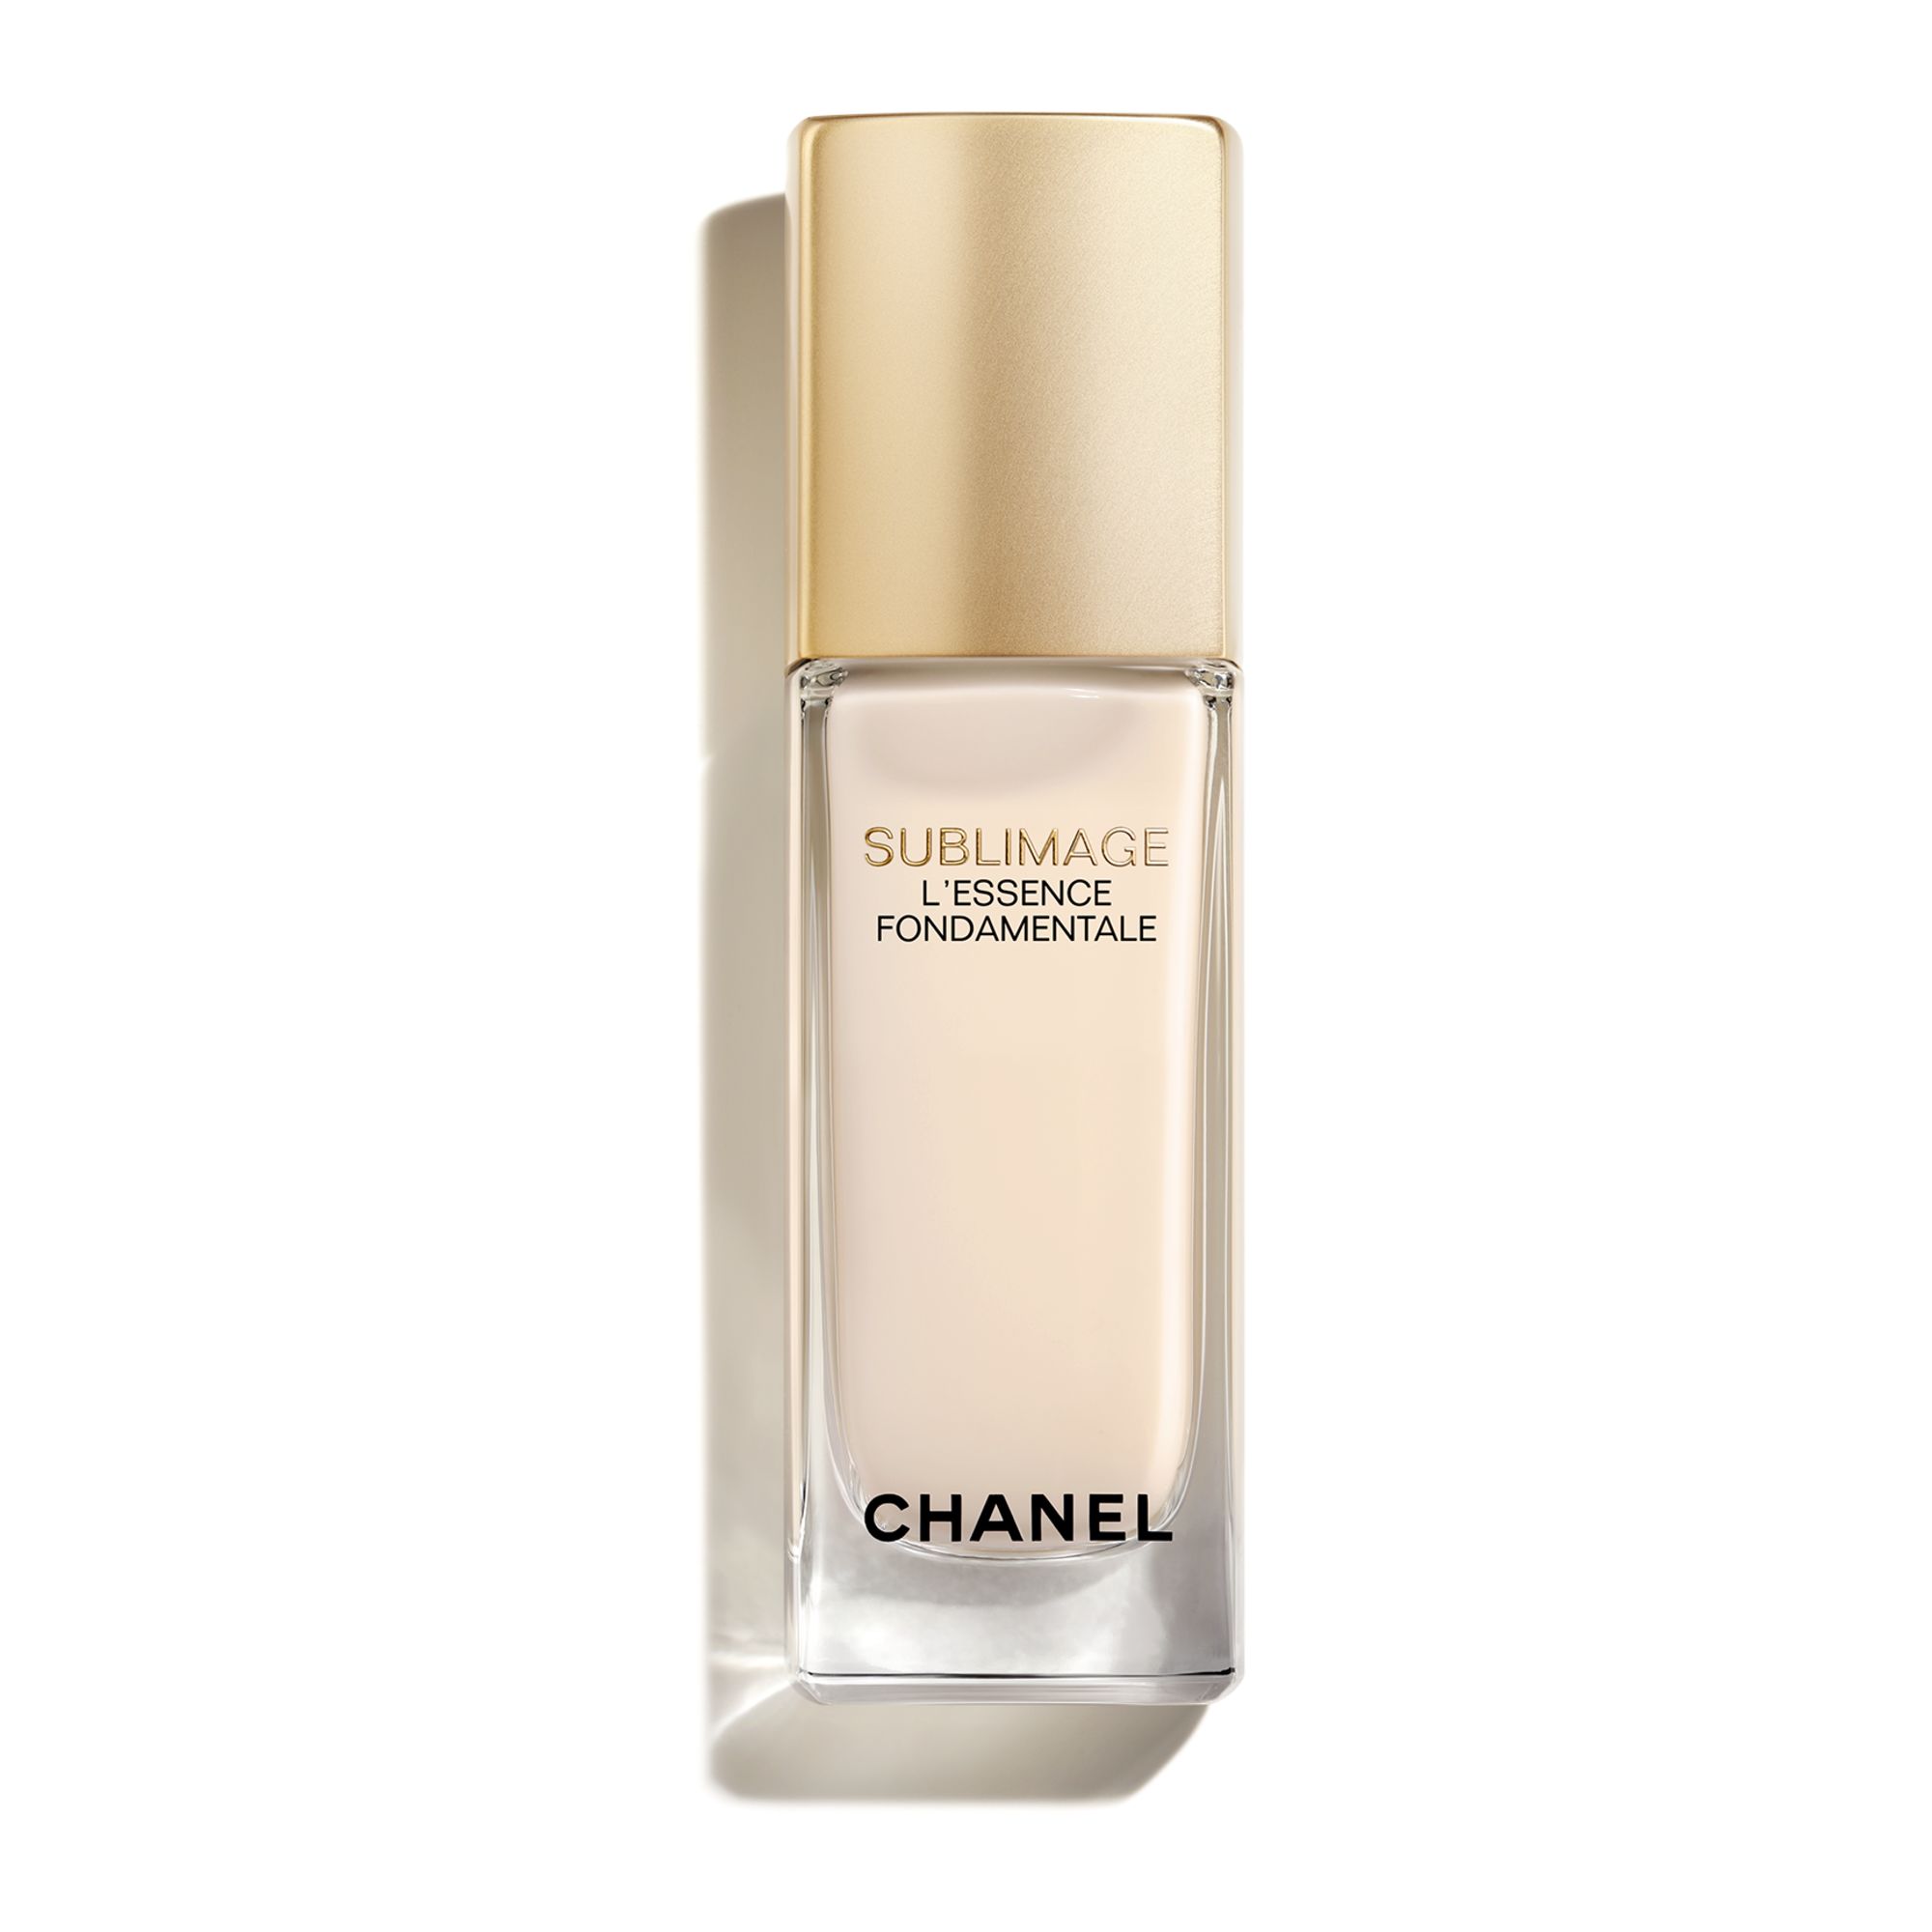 CHANEL, Skincare, Chanel Sublimage Lessence Lumiere New